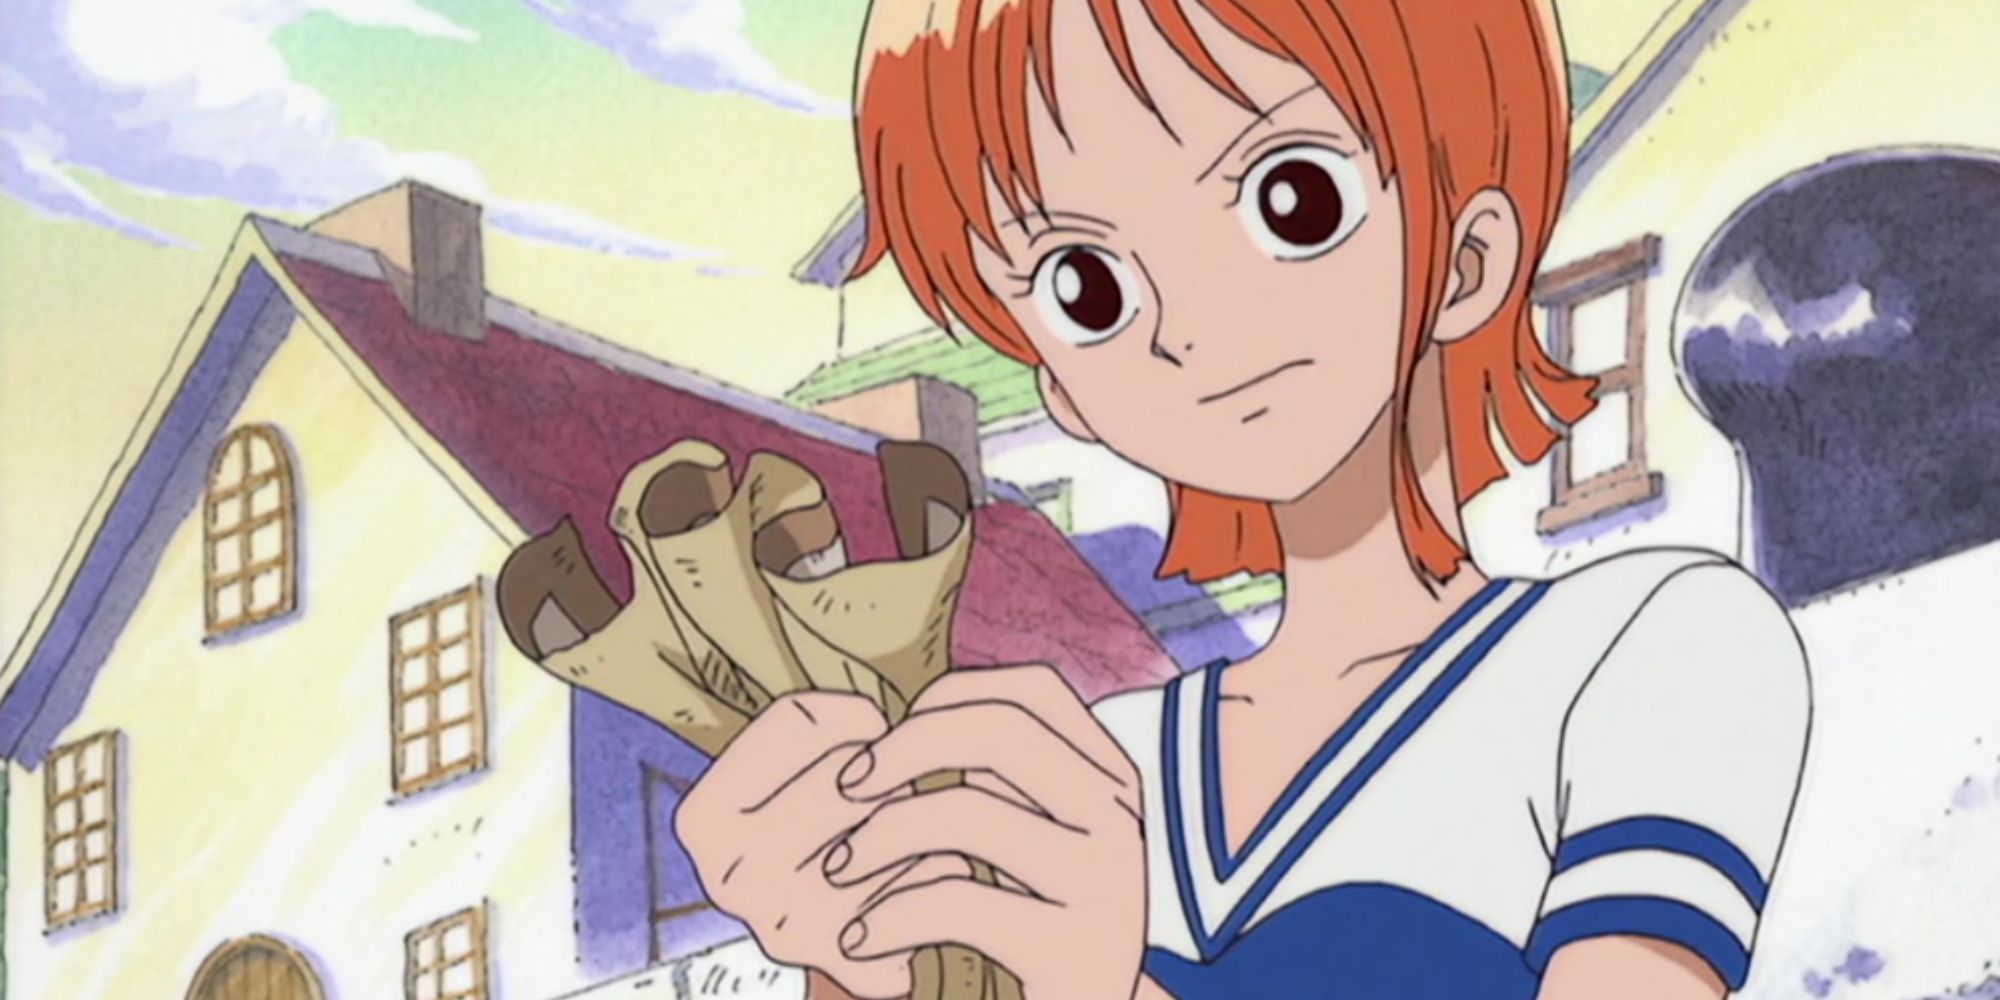 Nami looks at a map during the Orange Town arc in One Piece.